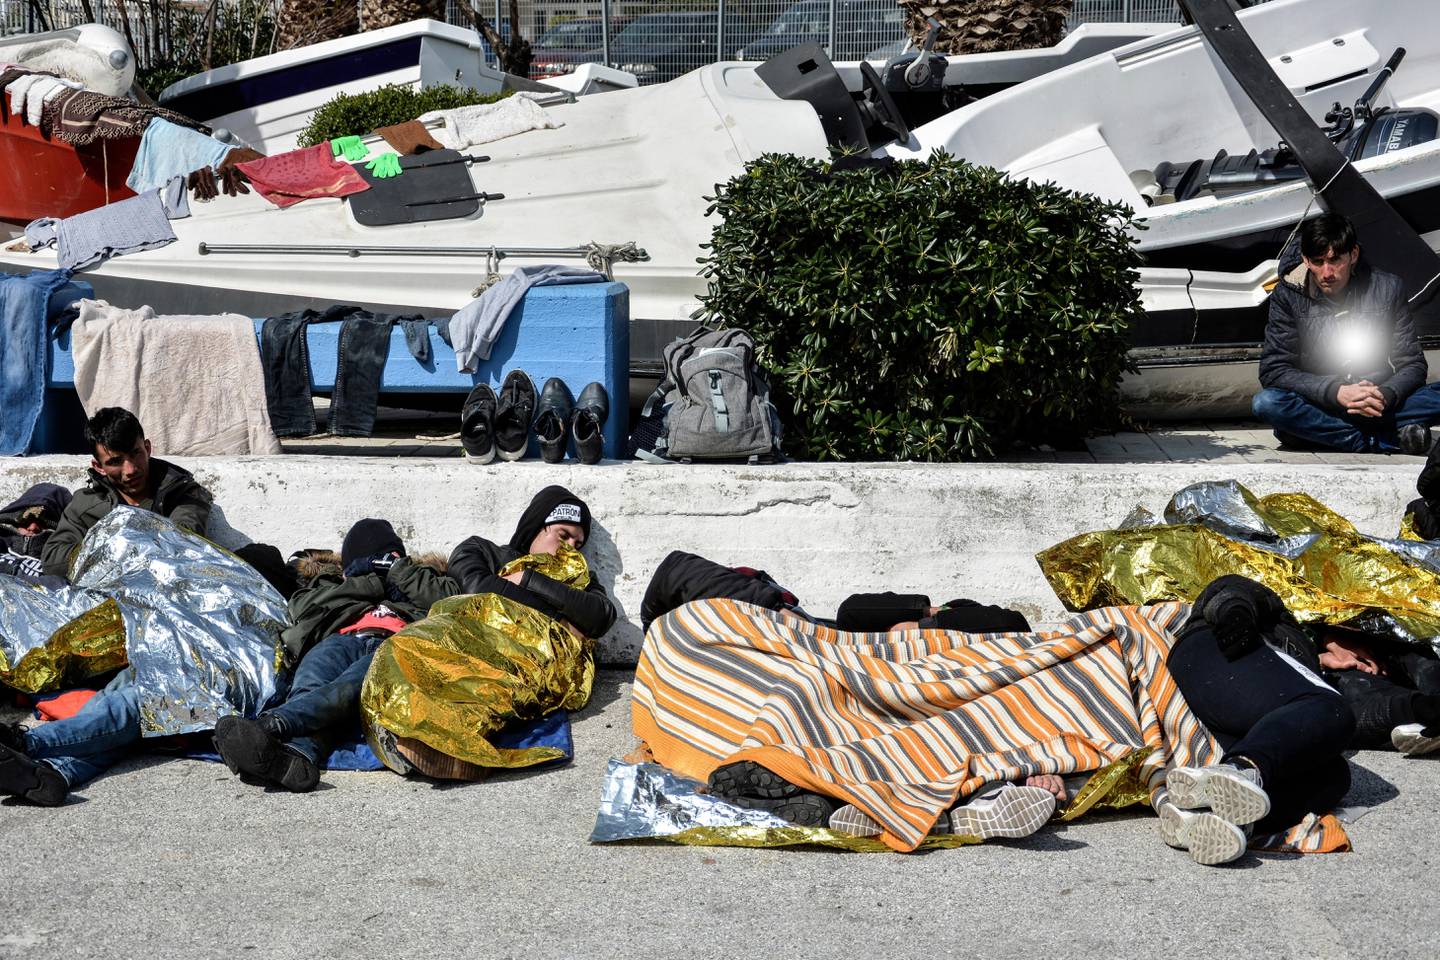 Migrants camp out at the port of Mytilene after locals block access to the Moria refugee camp, on the northeastern Aegean island of Lesbos, Greece, on Tuesday, March 3, 2020. Migrants and refugees hoping to enter Greece from Turkey appeared to be fanning out across a broader swathe of the roughly 200-kilometer-long land border Tuesday, maintaining pressure on the frontier after Ankara declared its borders with the European Union open. (AP Photo/Panagiotis Balaskas)